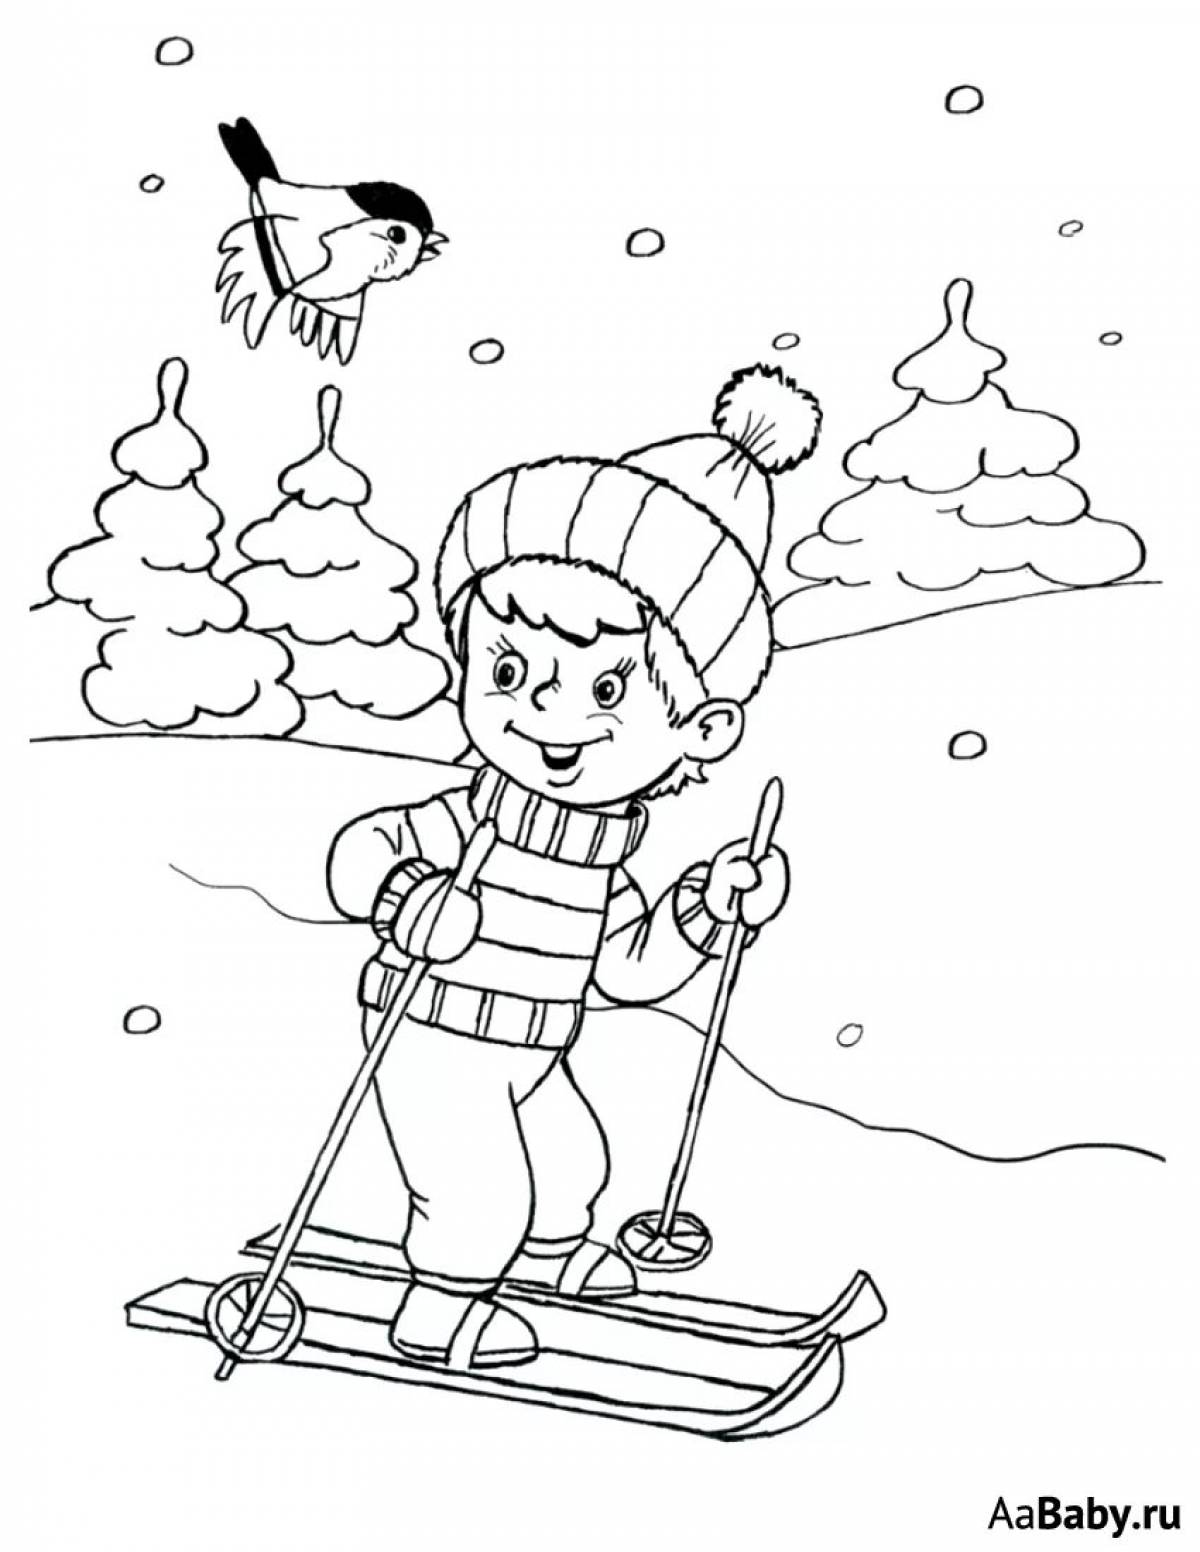 Boy skiing for kids #5